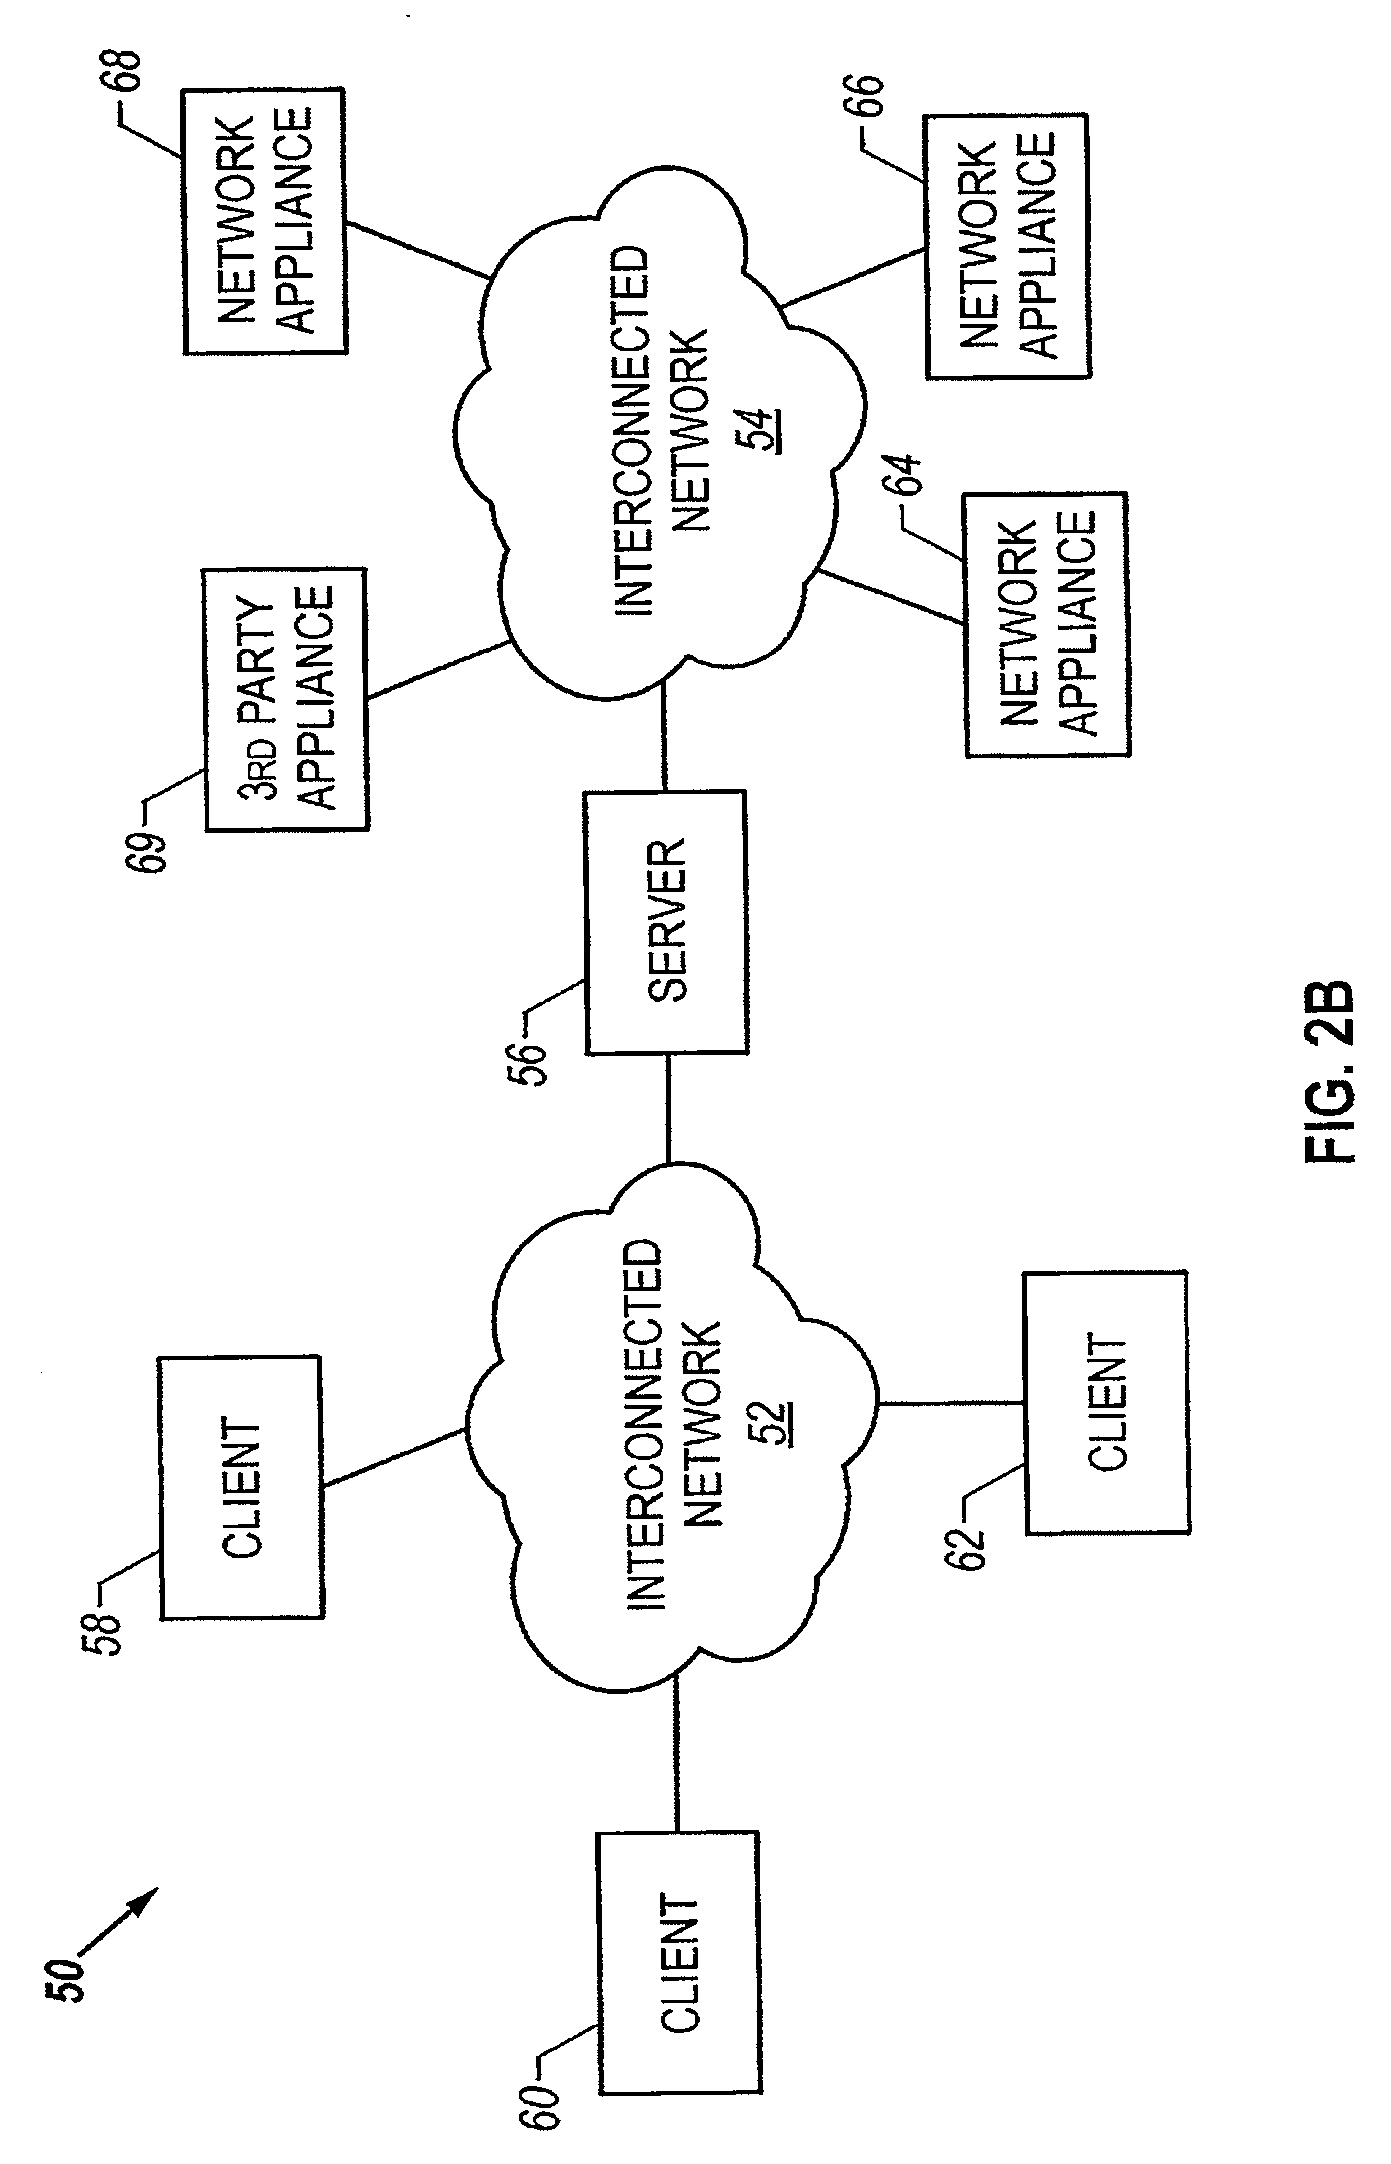 Methods for displaying physical network topology and environmental status by location, organization, or responsible party